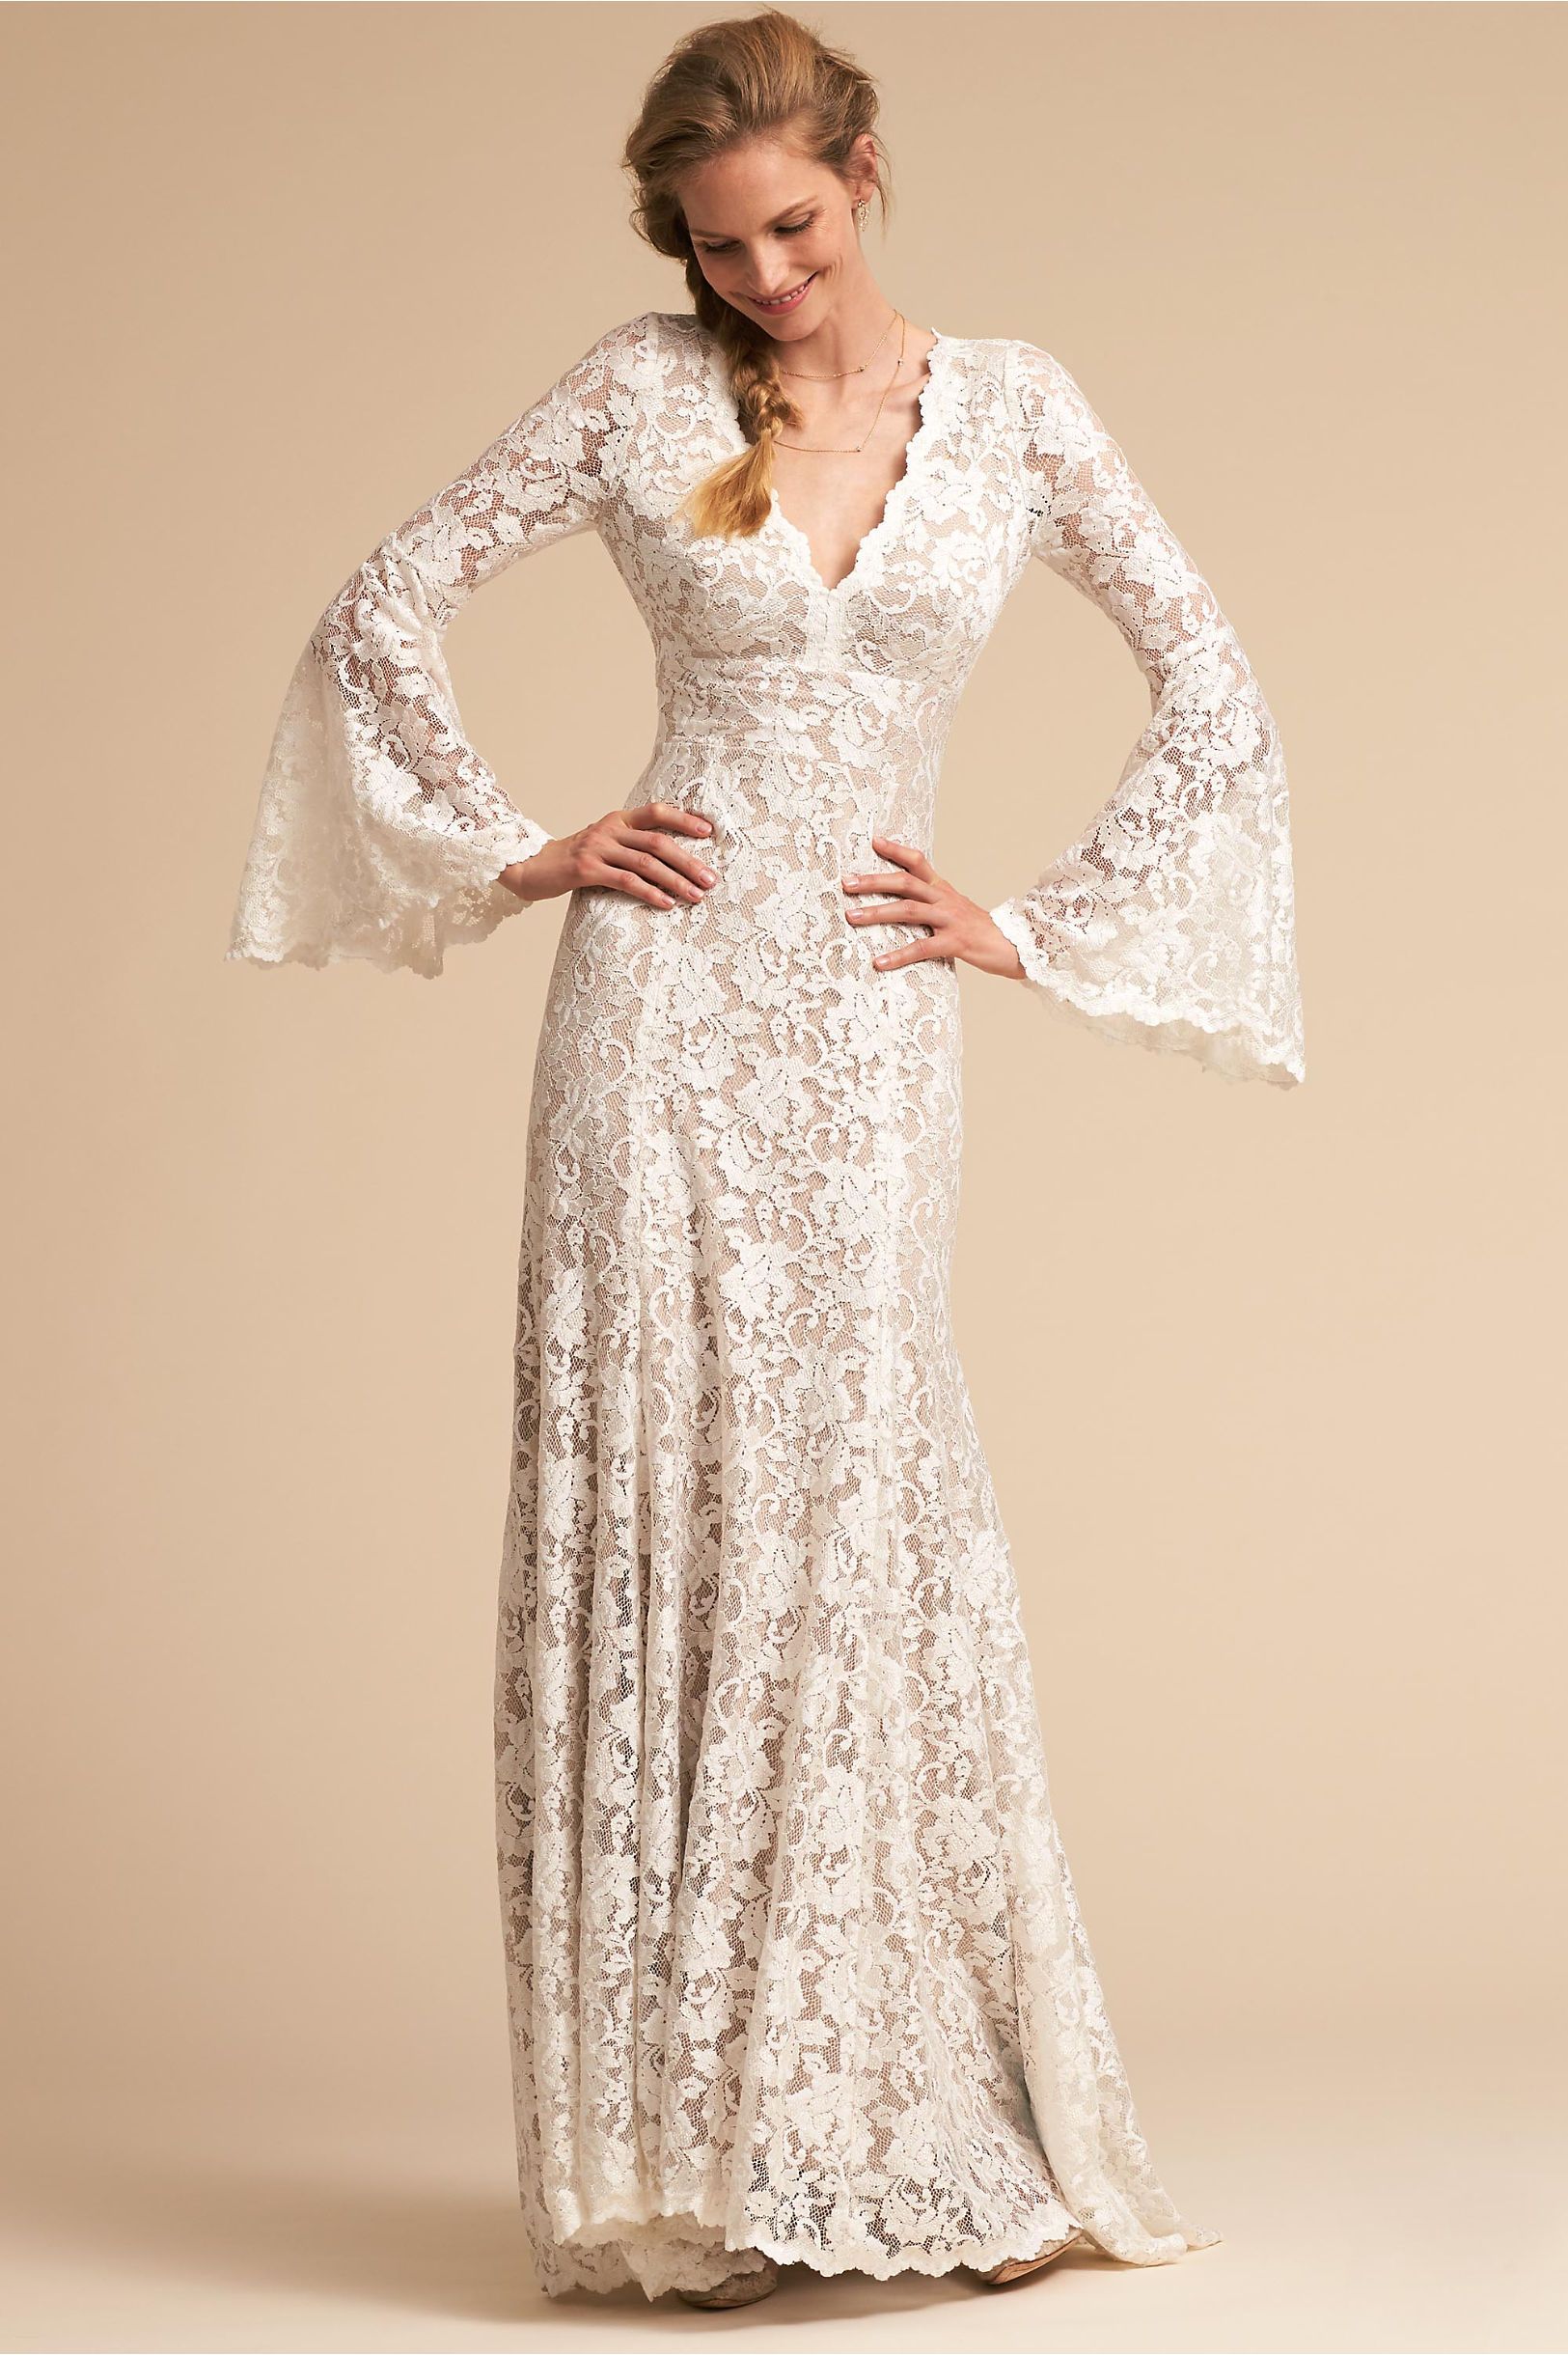 Sparkly Floral Lace Sweetheart Gown with Swag Sleeves Simply Val Stefani  S2239 Alexis